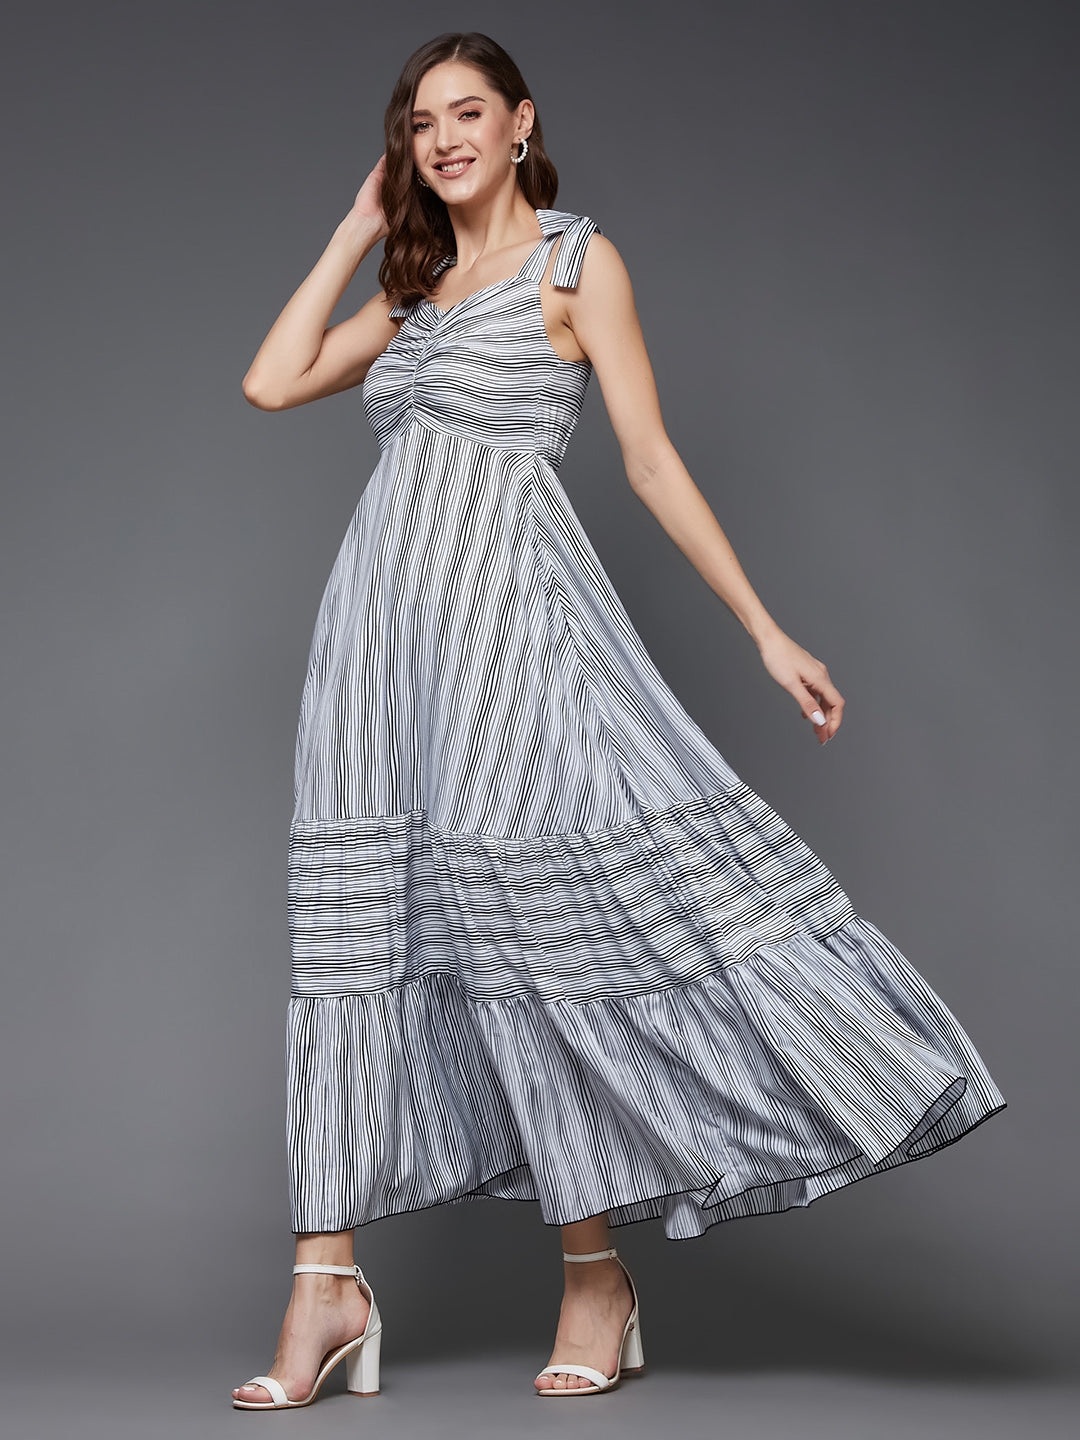 Black and White Striped Sweet-Heart Neck Tie-Up Viscose Rayon Tiered Relaxed Fit Longline Dress